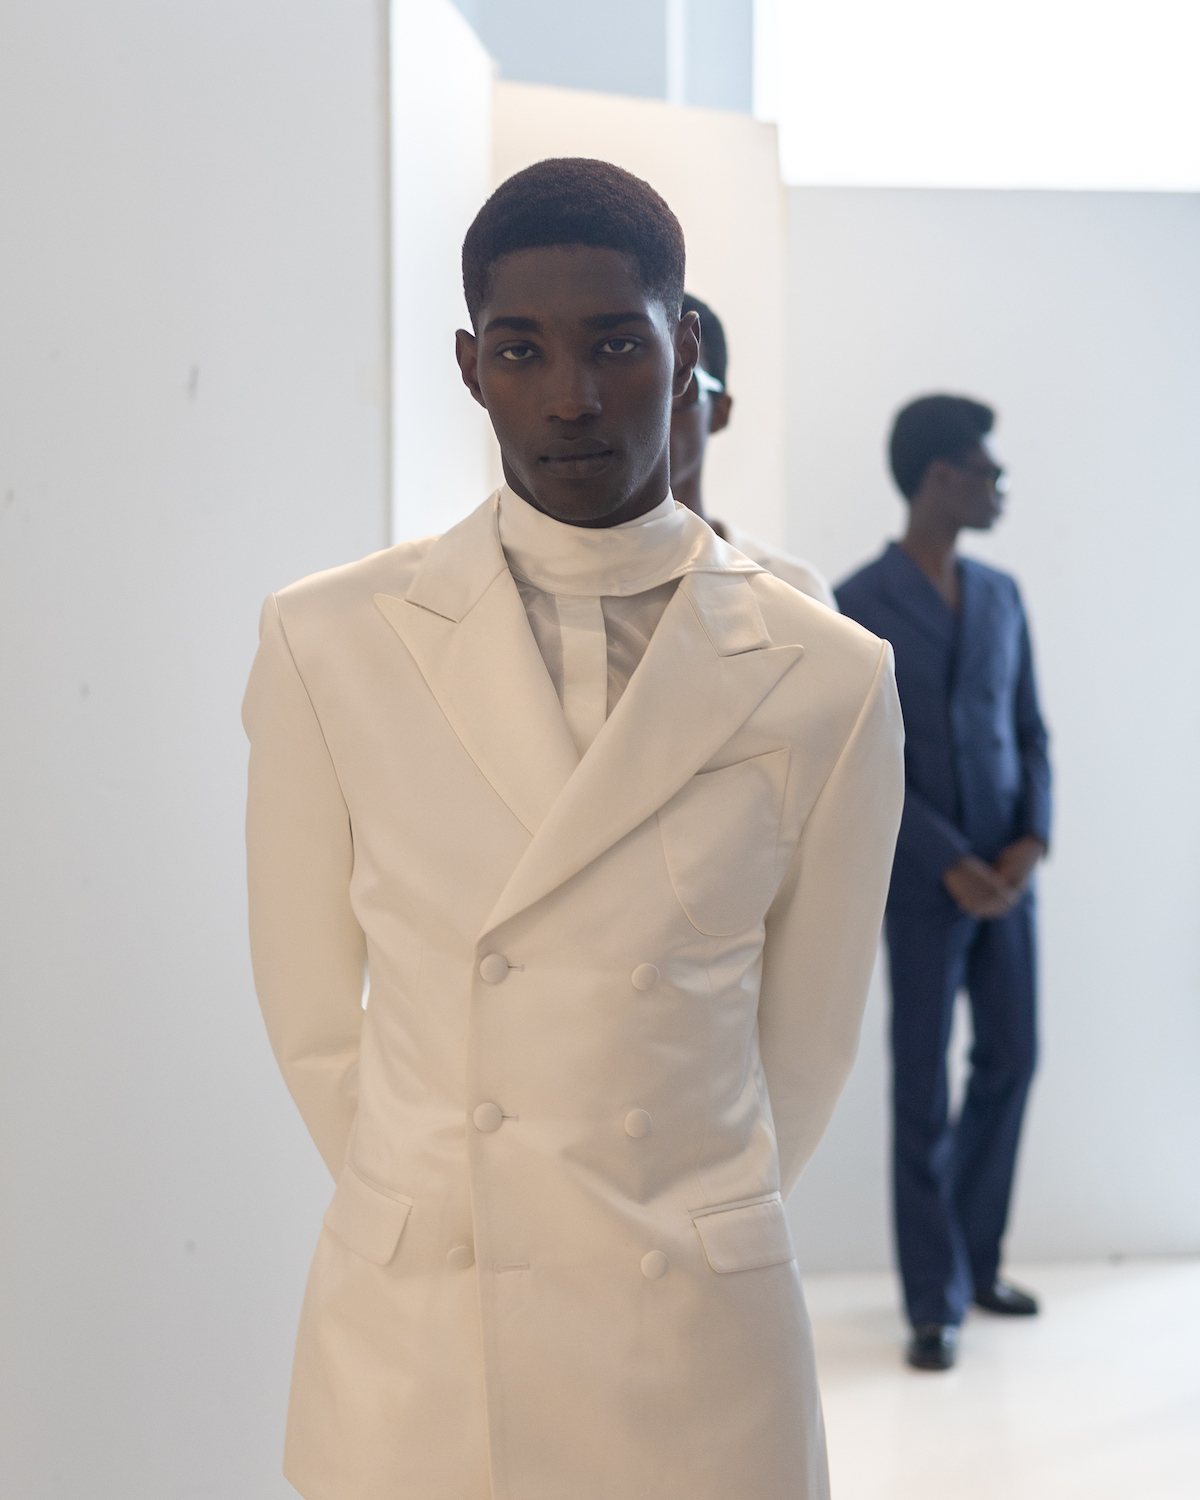 A model wearing a white suit stands in a white showroom. The model is wearing clothes from B.M.C.